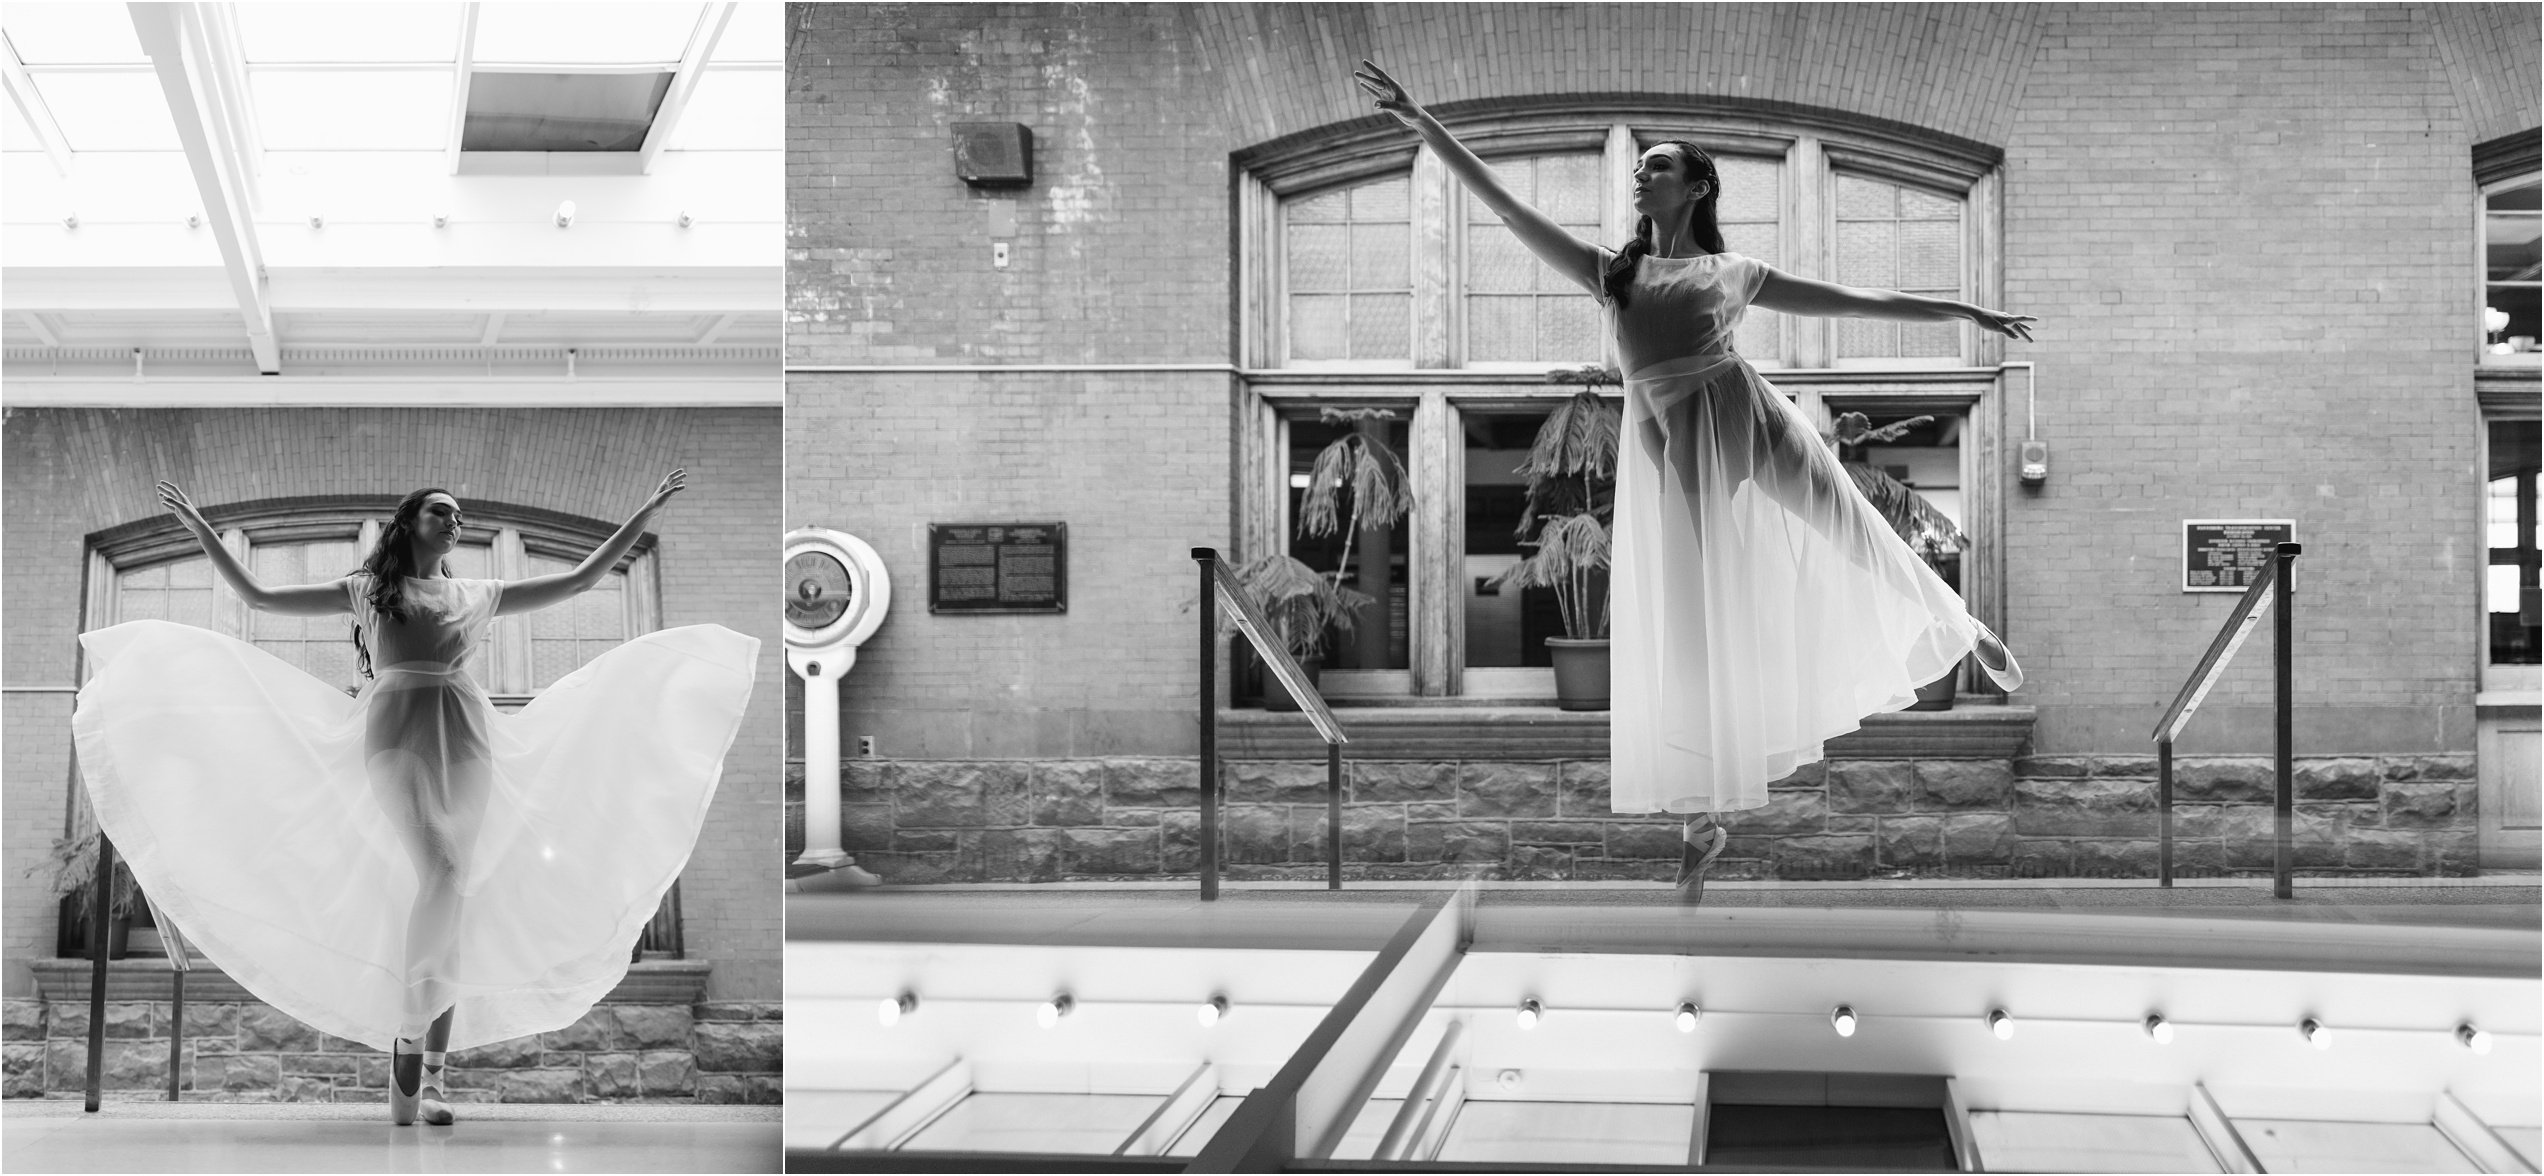 Set of two black and white images. First Image: Ballerina in light sheer dress and dark bodysuit with long dark hair throwing her sheer skirt. Second Image: Same ballerina on pointe in arabesque at the top of a staircase in a train station.